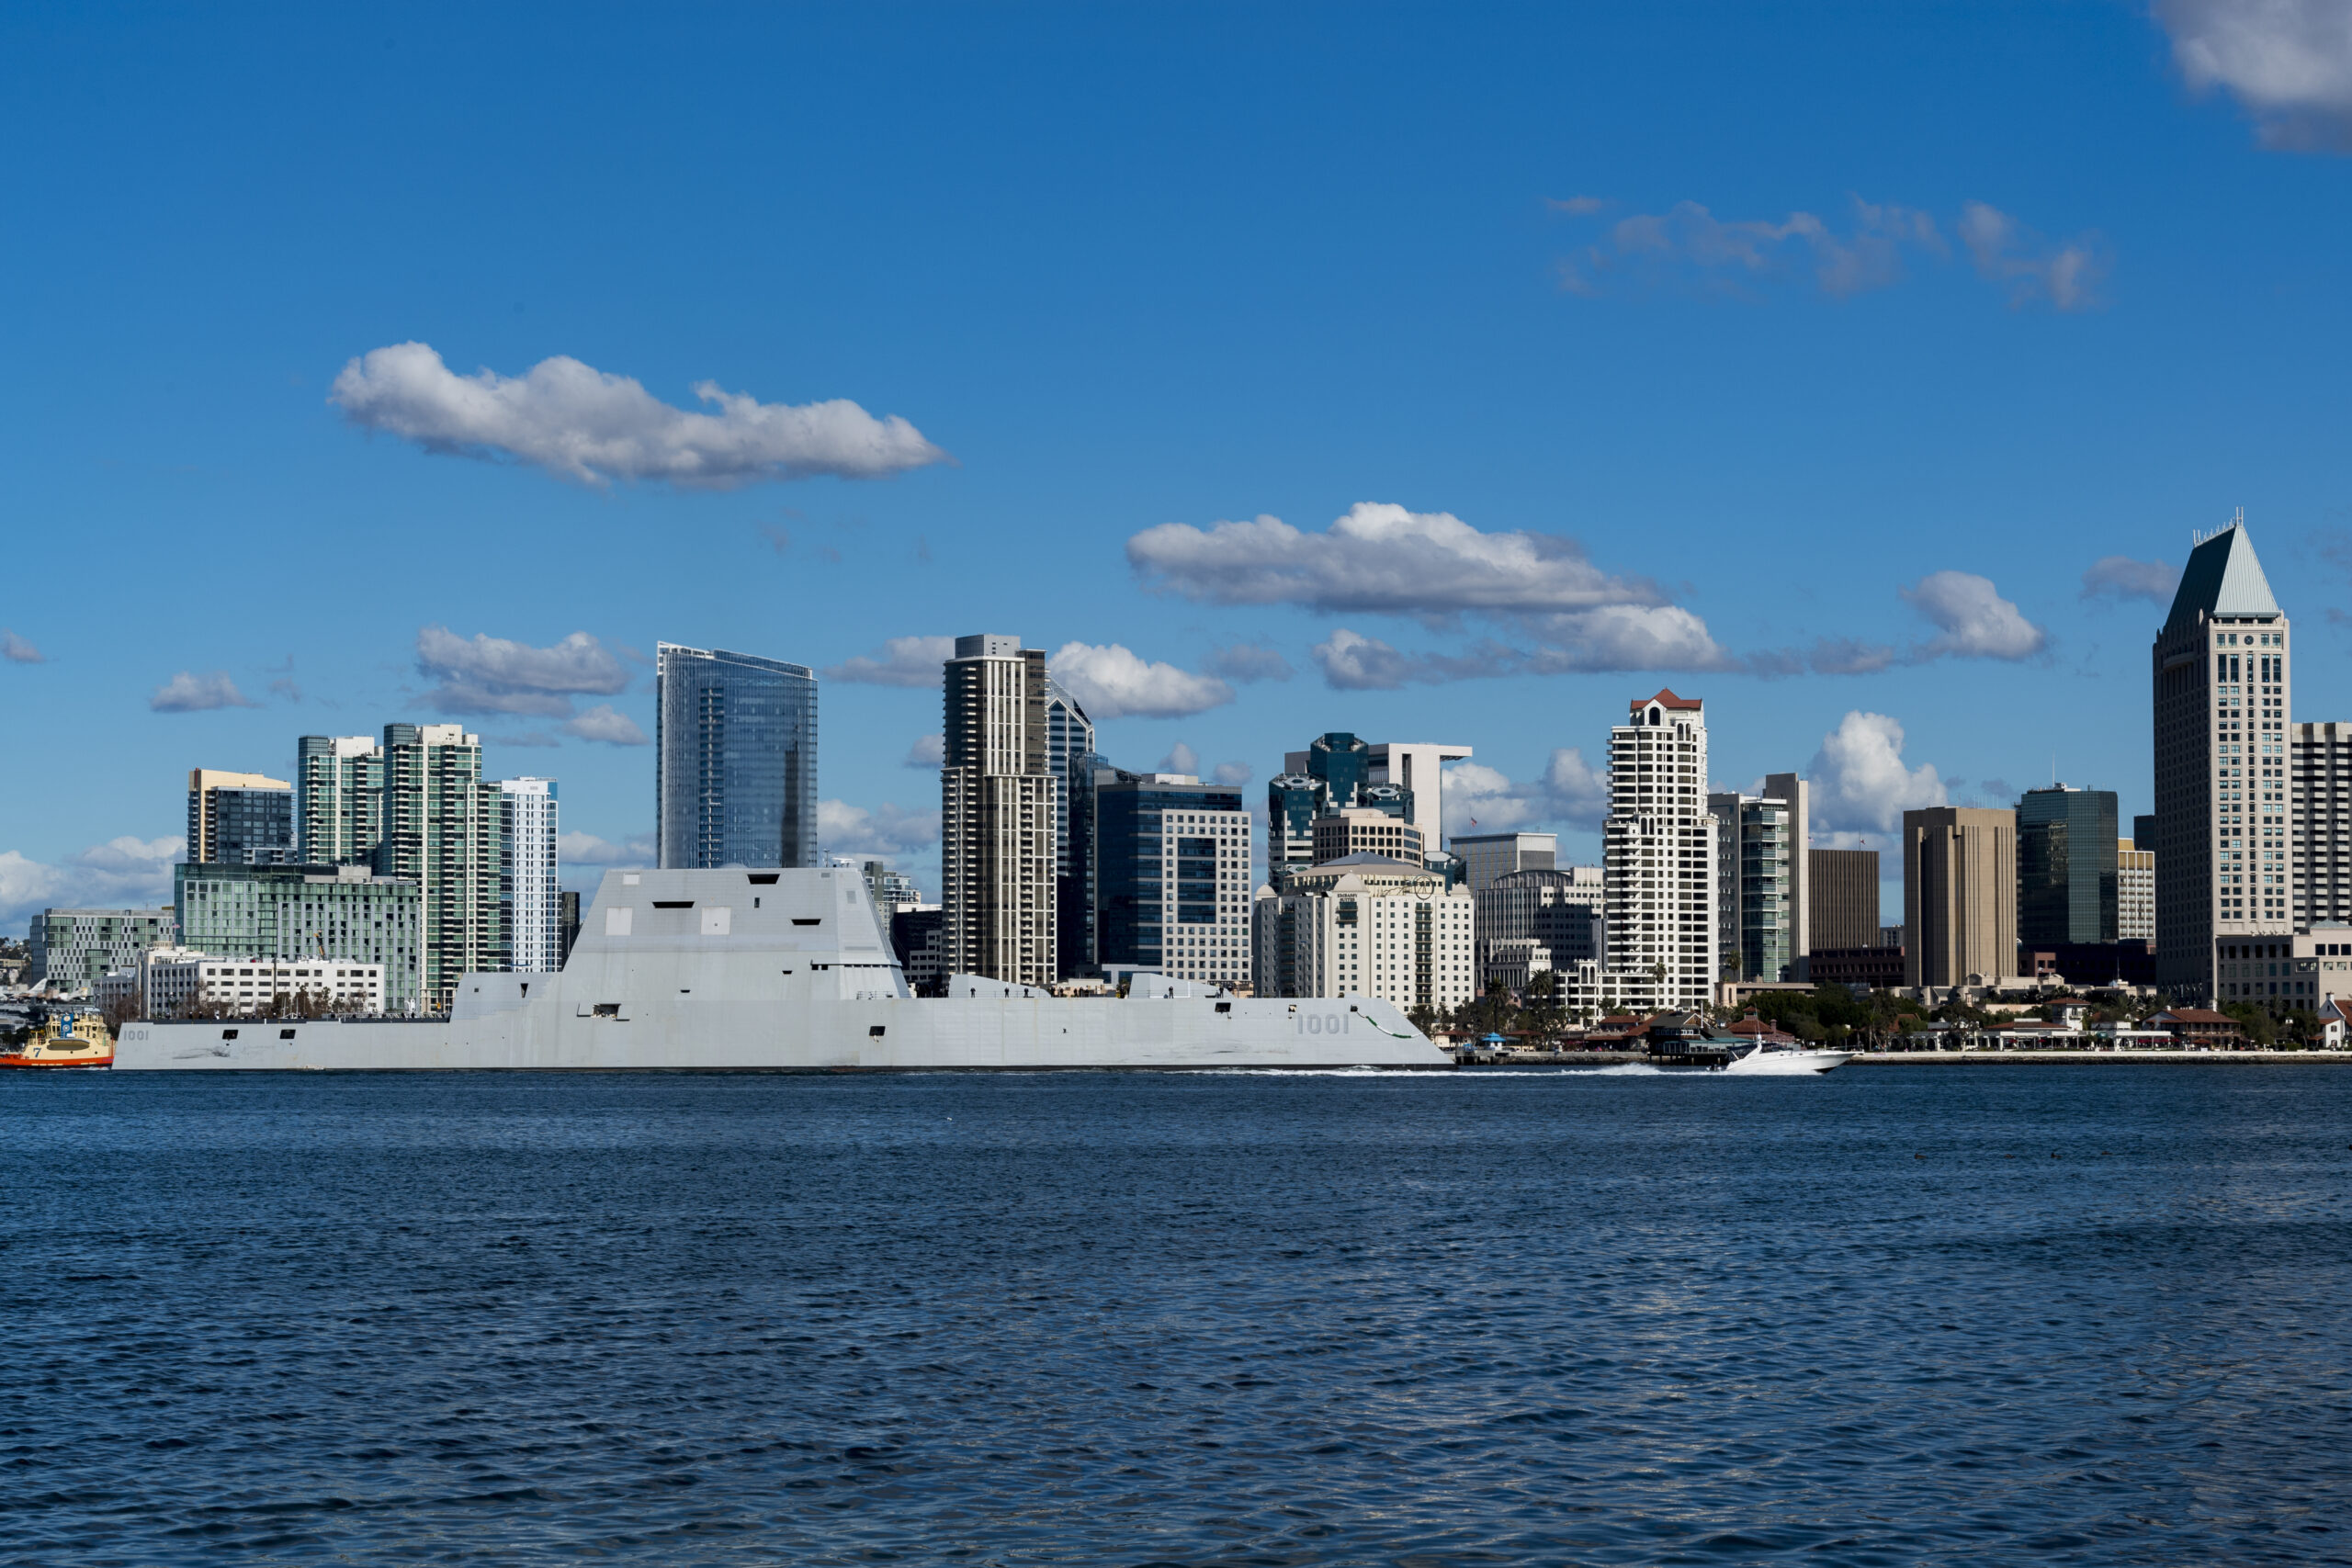 181207-N-LN093-1003 SAN DIEGO (Dec. 7, 2018) The guided-missile destroyer Pre-Commissioning Unit (PCU) Michael Monsoor (DDG 1001) transits the San Diego Bay. The future USS Michael Monsoor is the second ship in the Zumwalt-class of guided-missile destroyers and will undergo a combat availability and test period. The ship is scheduled to be commissioned into the Navy Jan. 26, 2019, in Coronado, Calif. (U.S. Navy photo by Mass Communication Specialist 2nd Class Jasen Moreno-Garcia/Released)